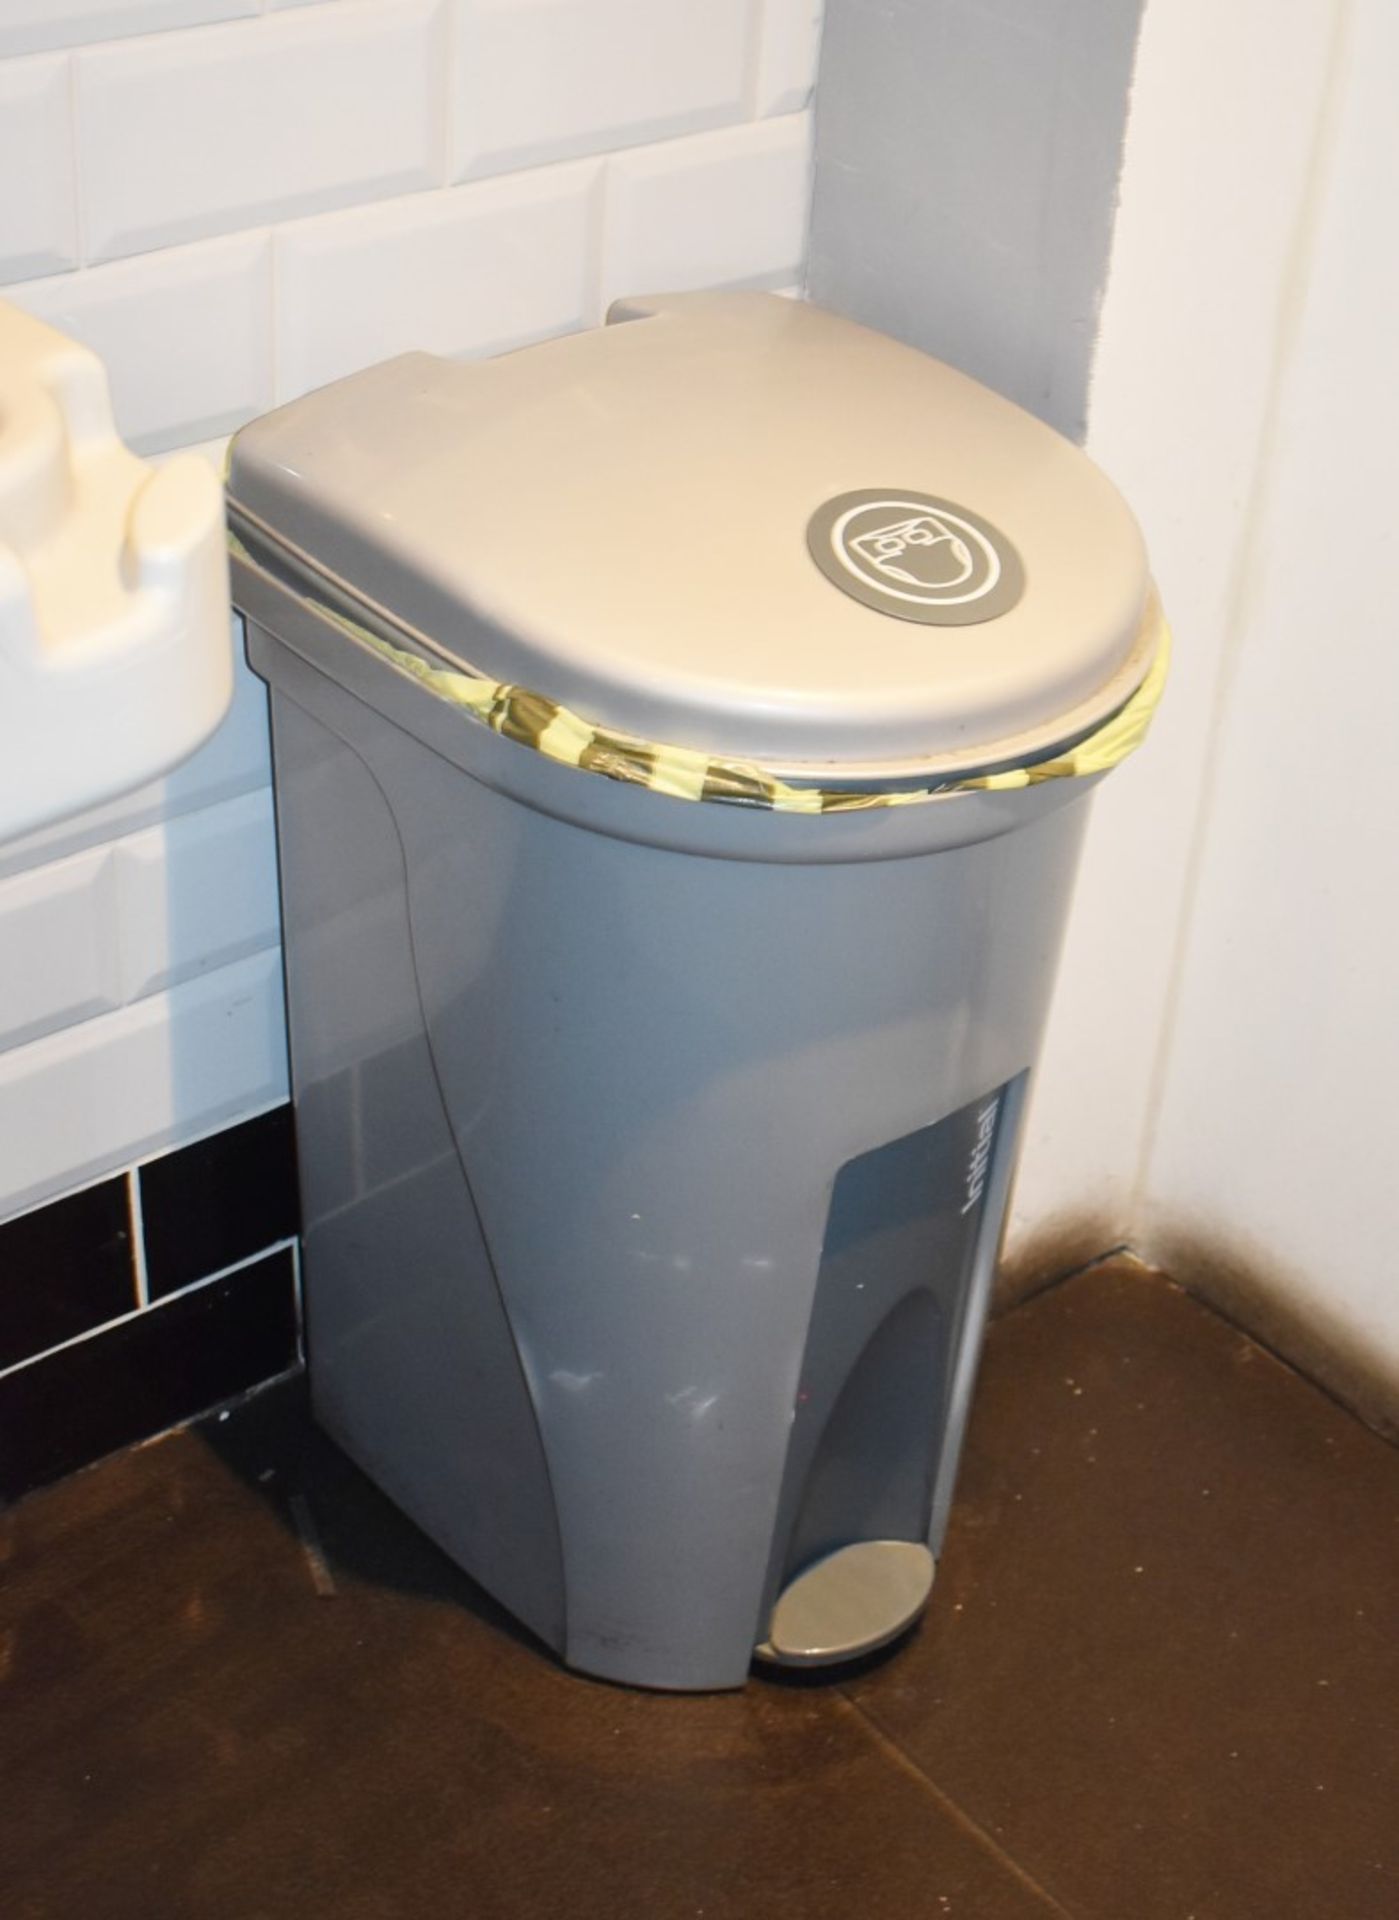 1 x Rest Room Waste Bin - CL586 - Location: Stockport SK1 This item is to be removed from a